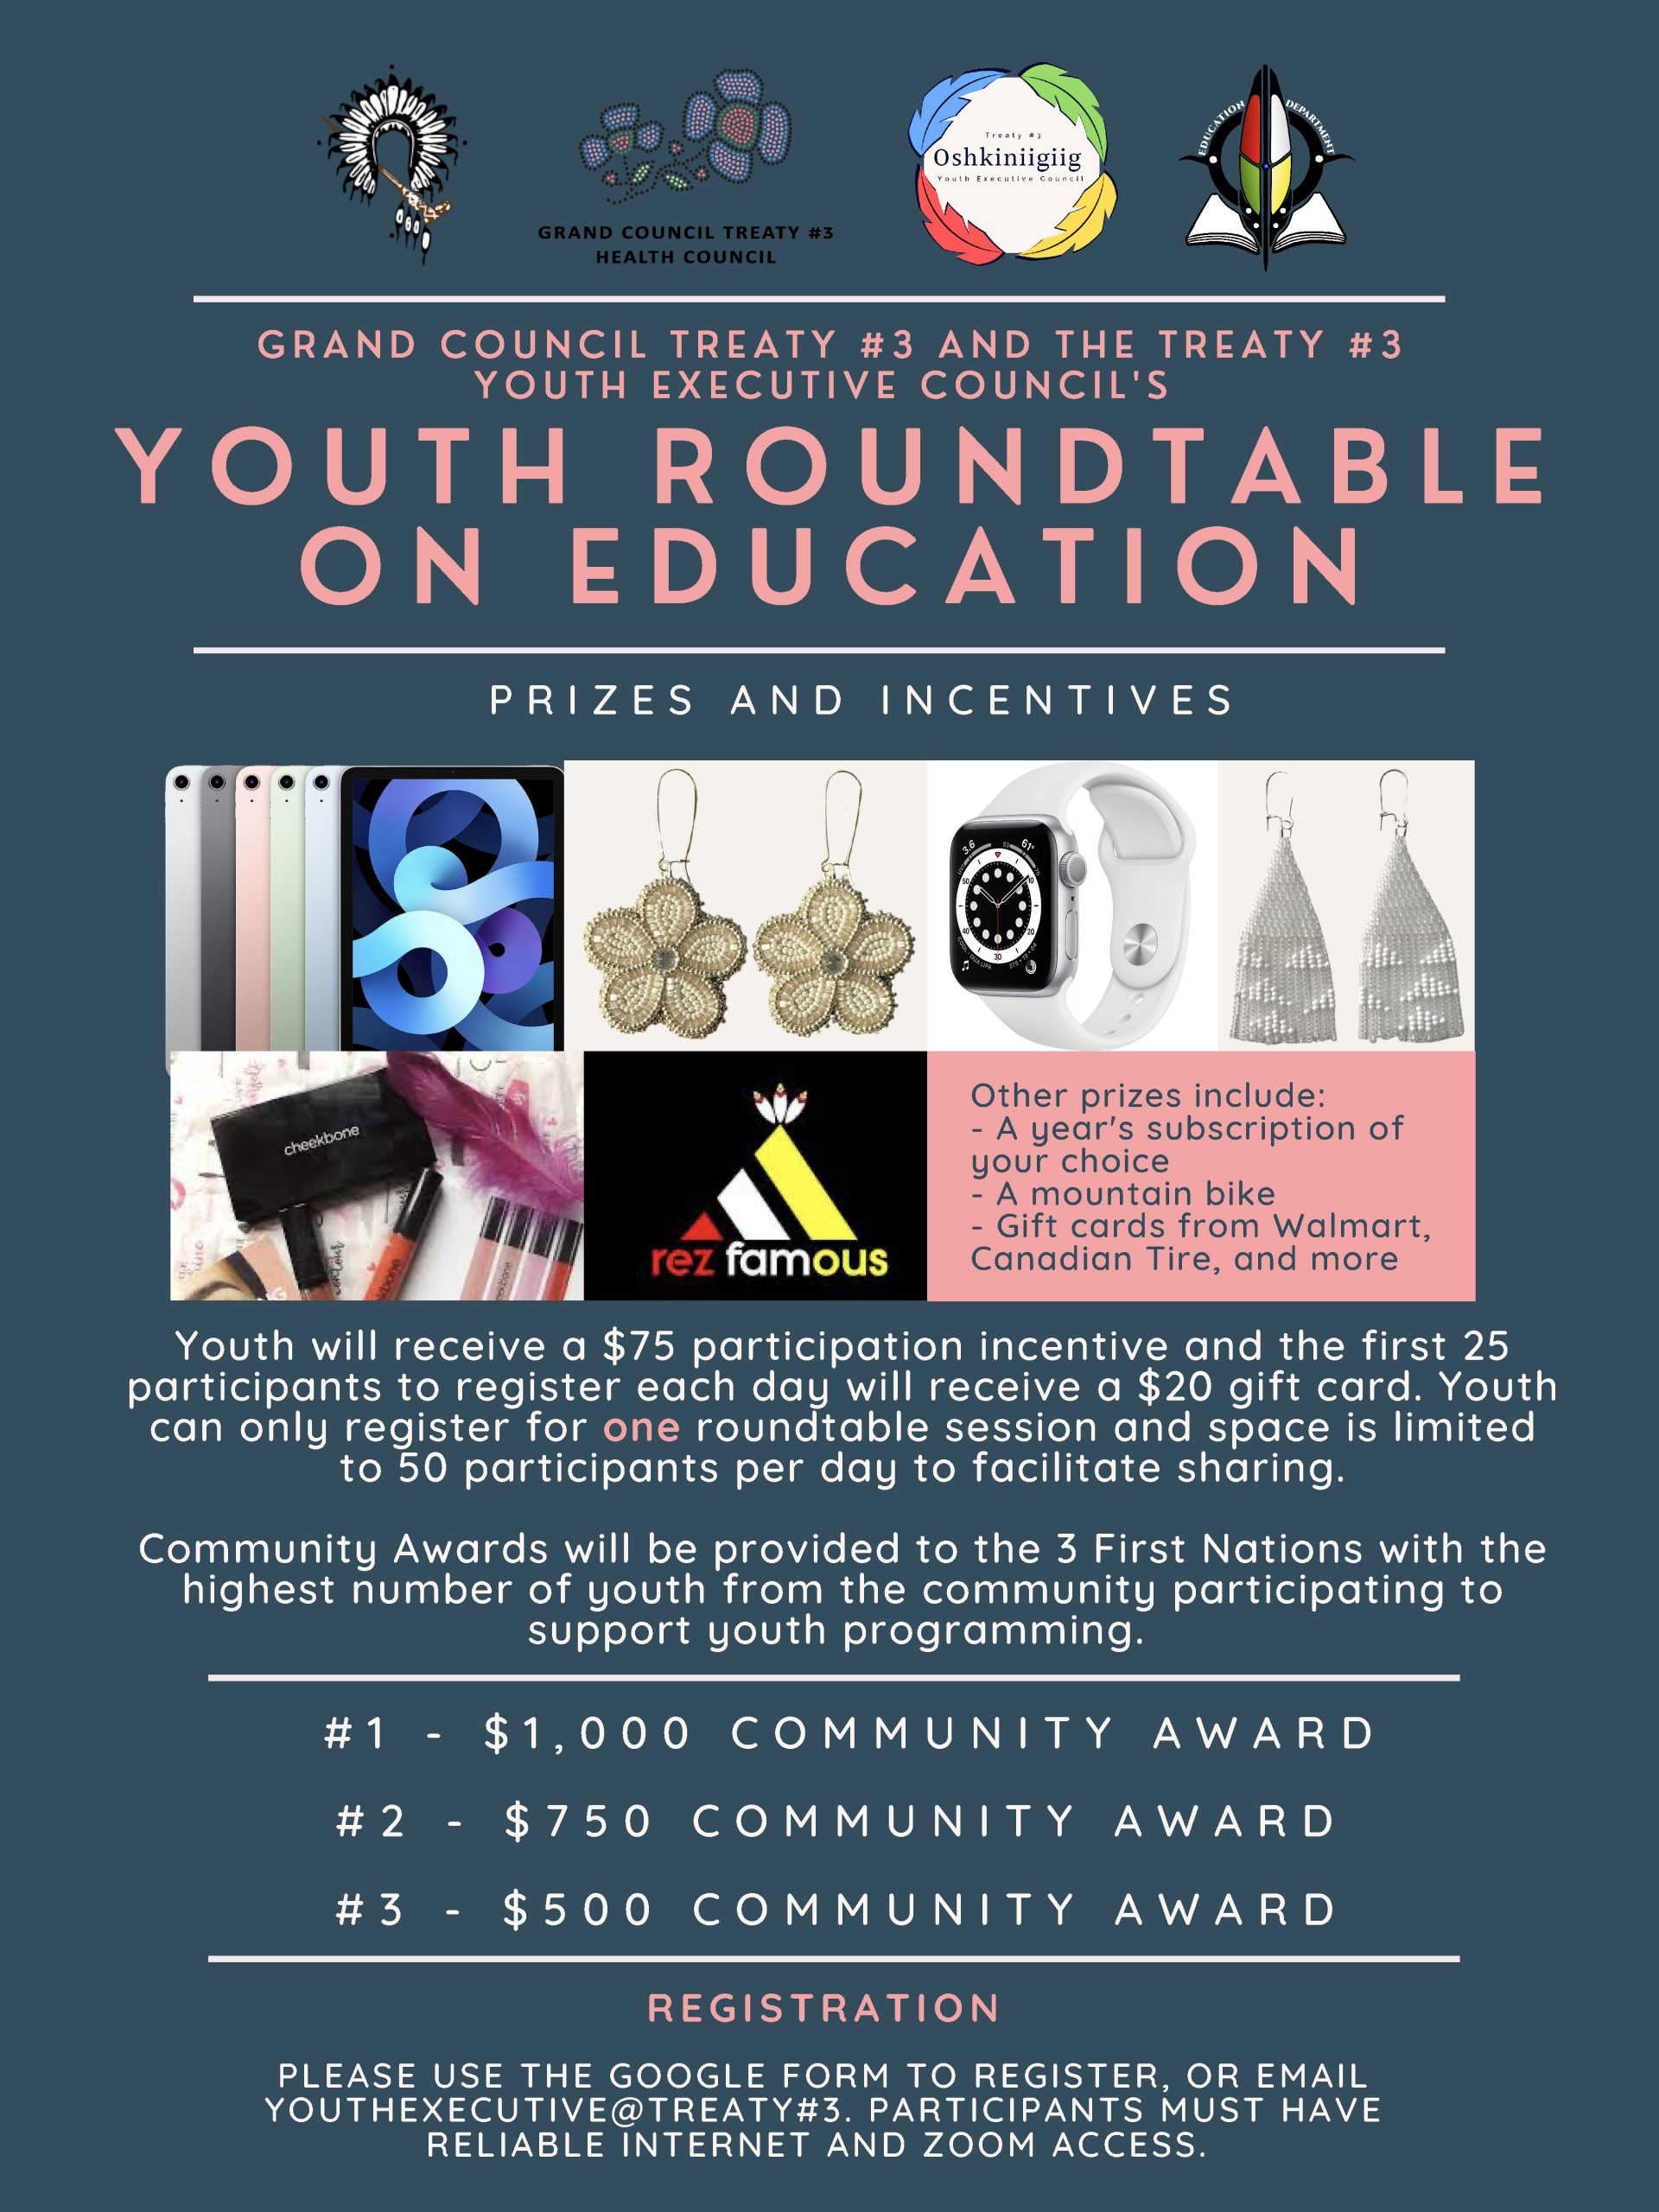 Youth Roundtable on Education - Grand Council Treaty #3